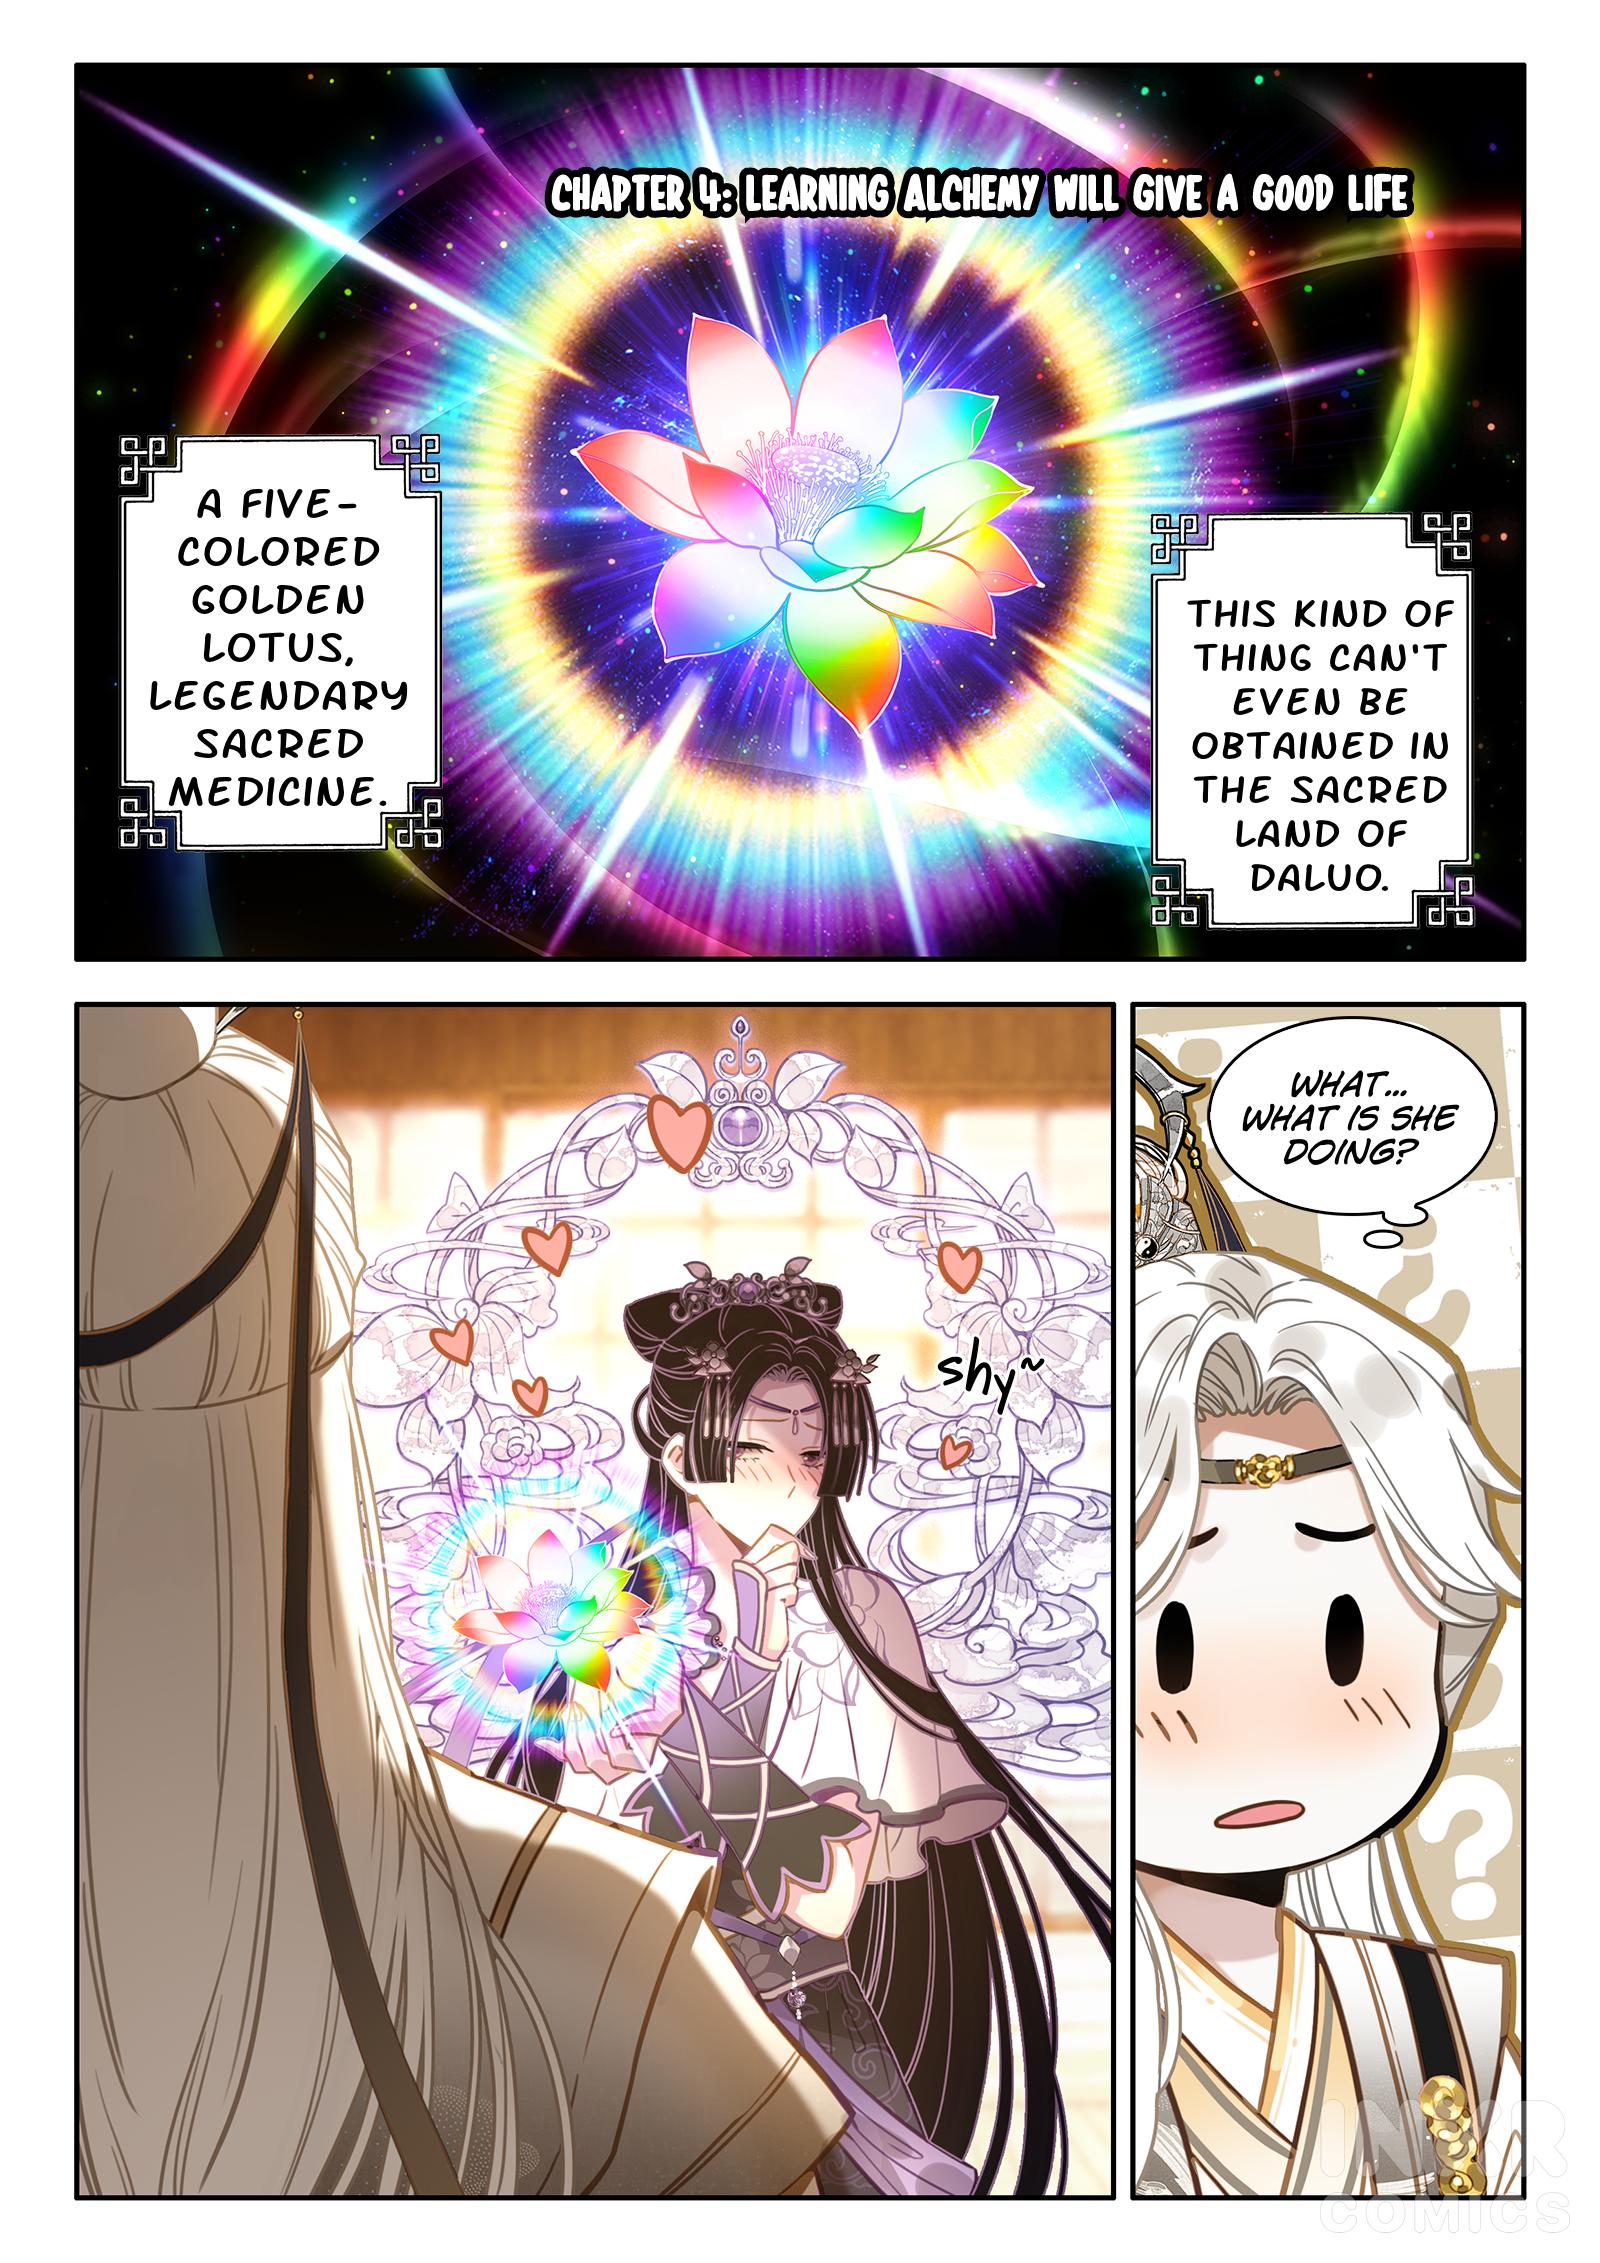 A Mediocre Senior Brother Chapter 4: Learning Alchemy Will Give A Good Life - Picture 1